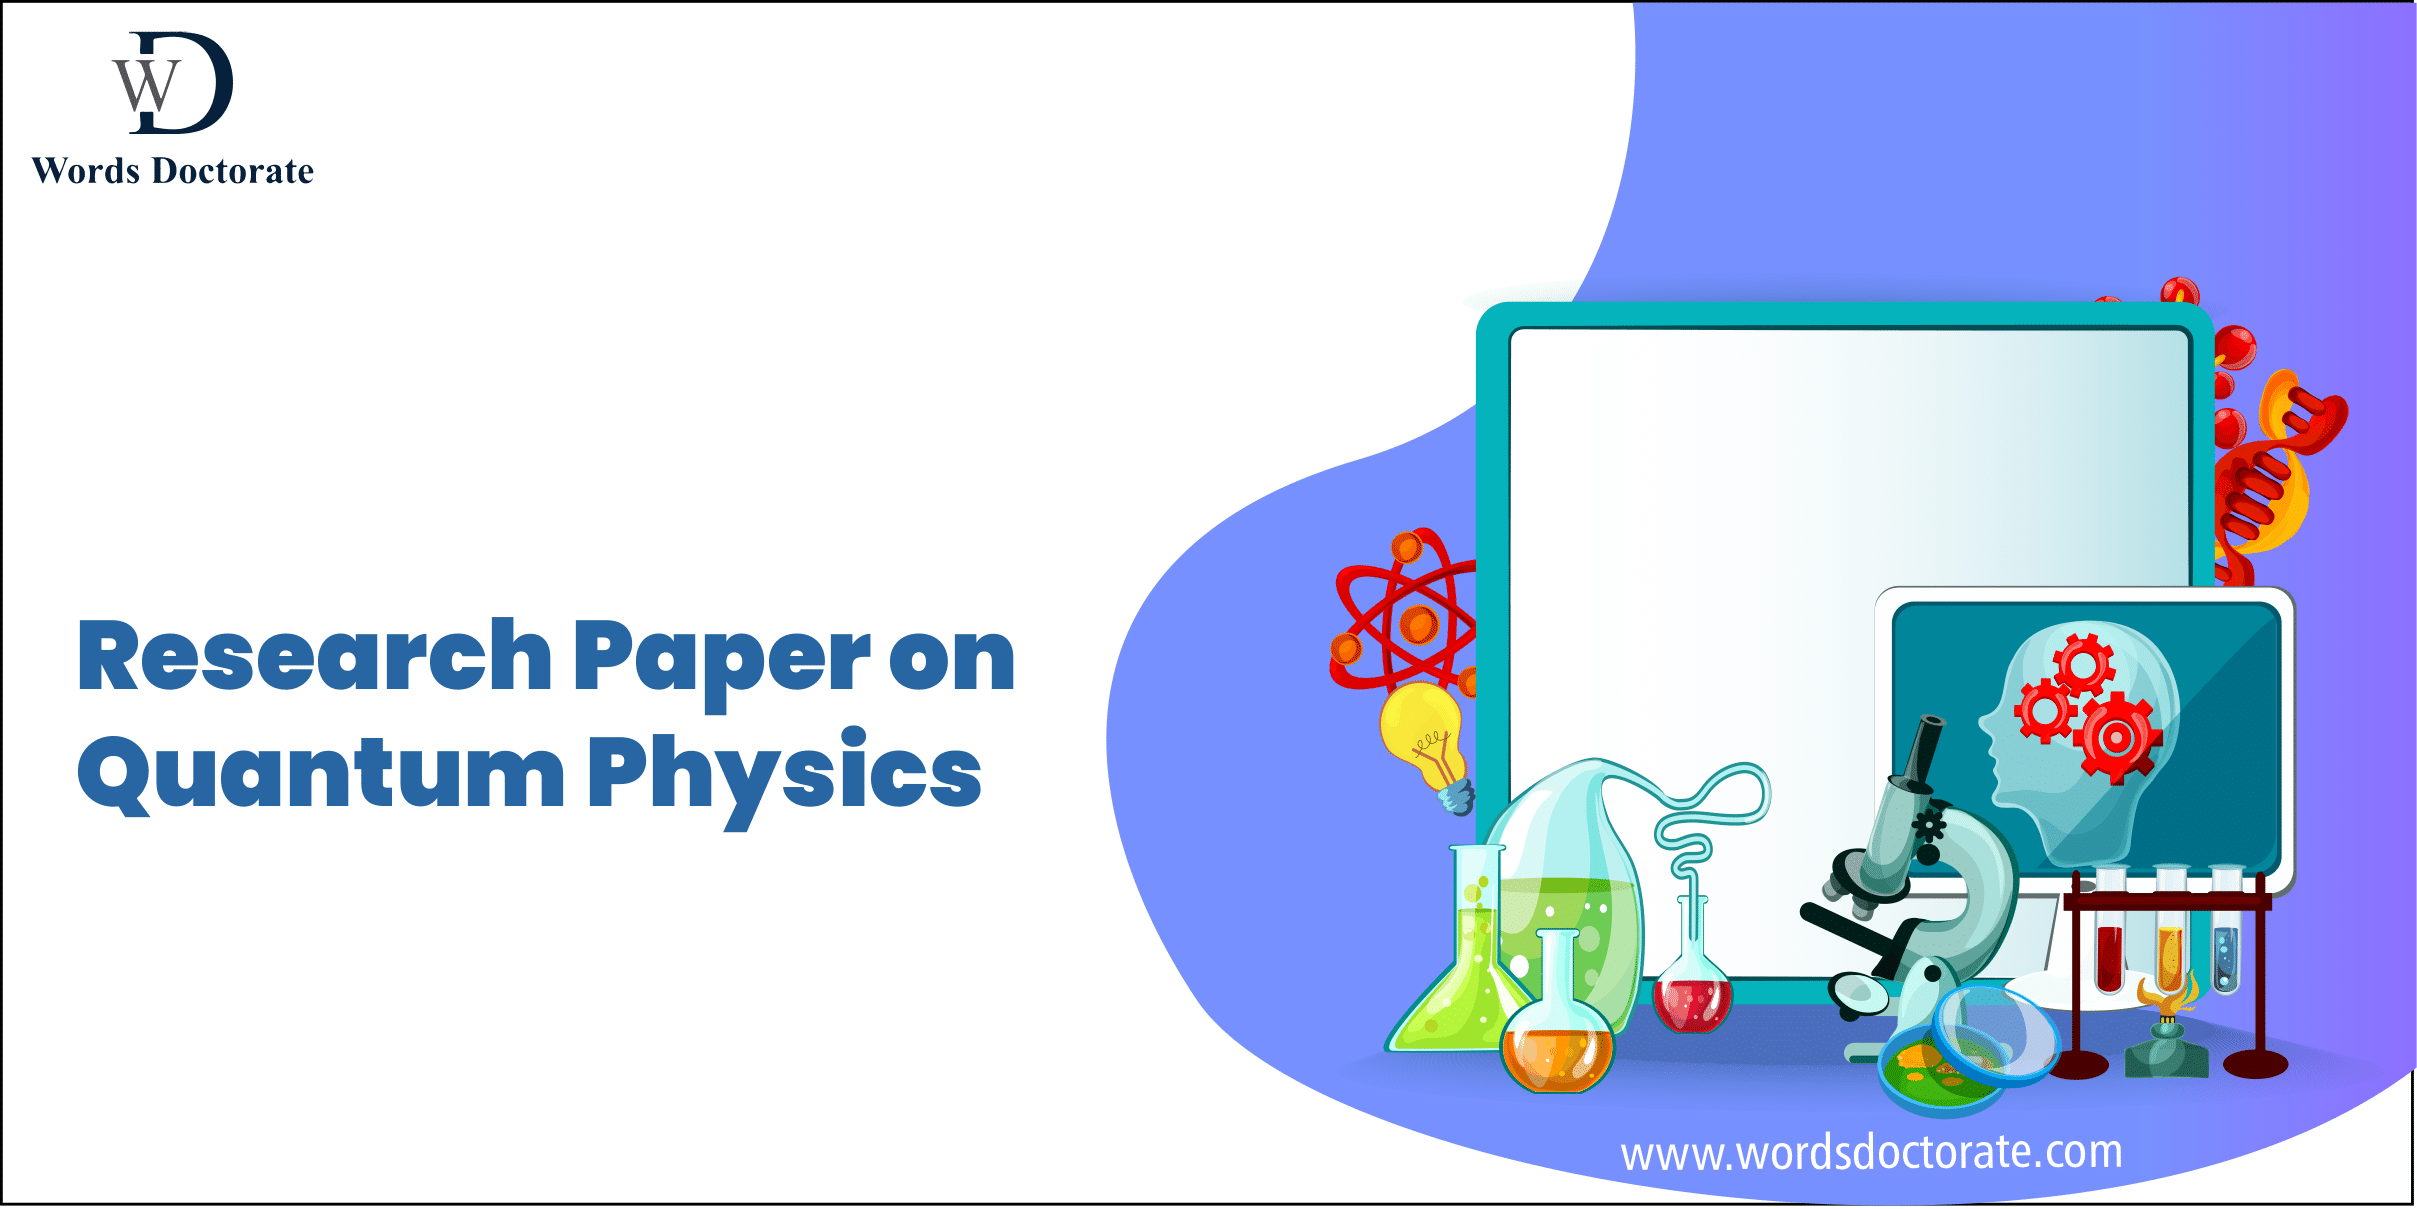 Research Paper on Quantum Physics